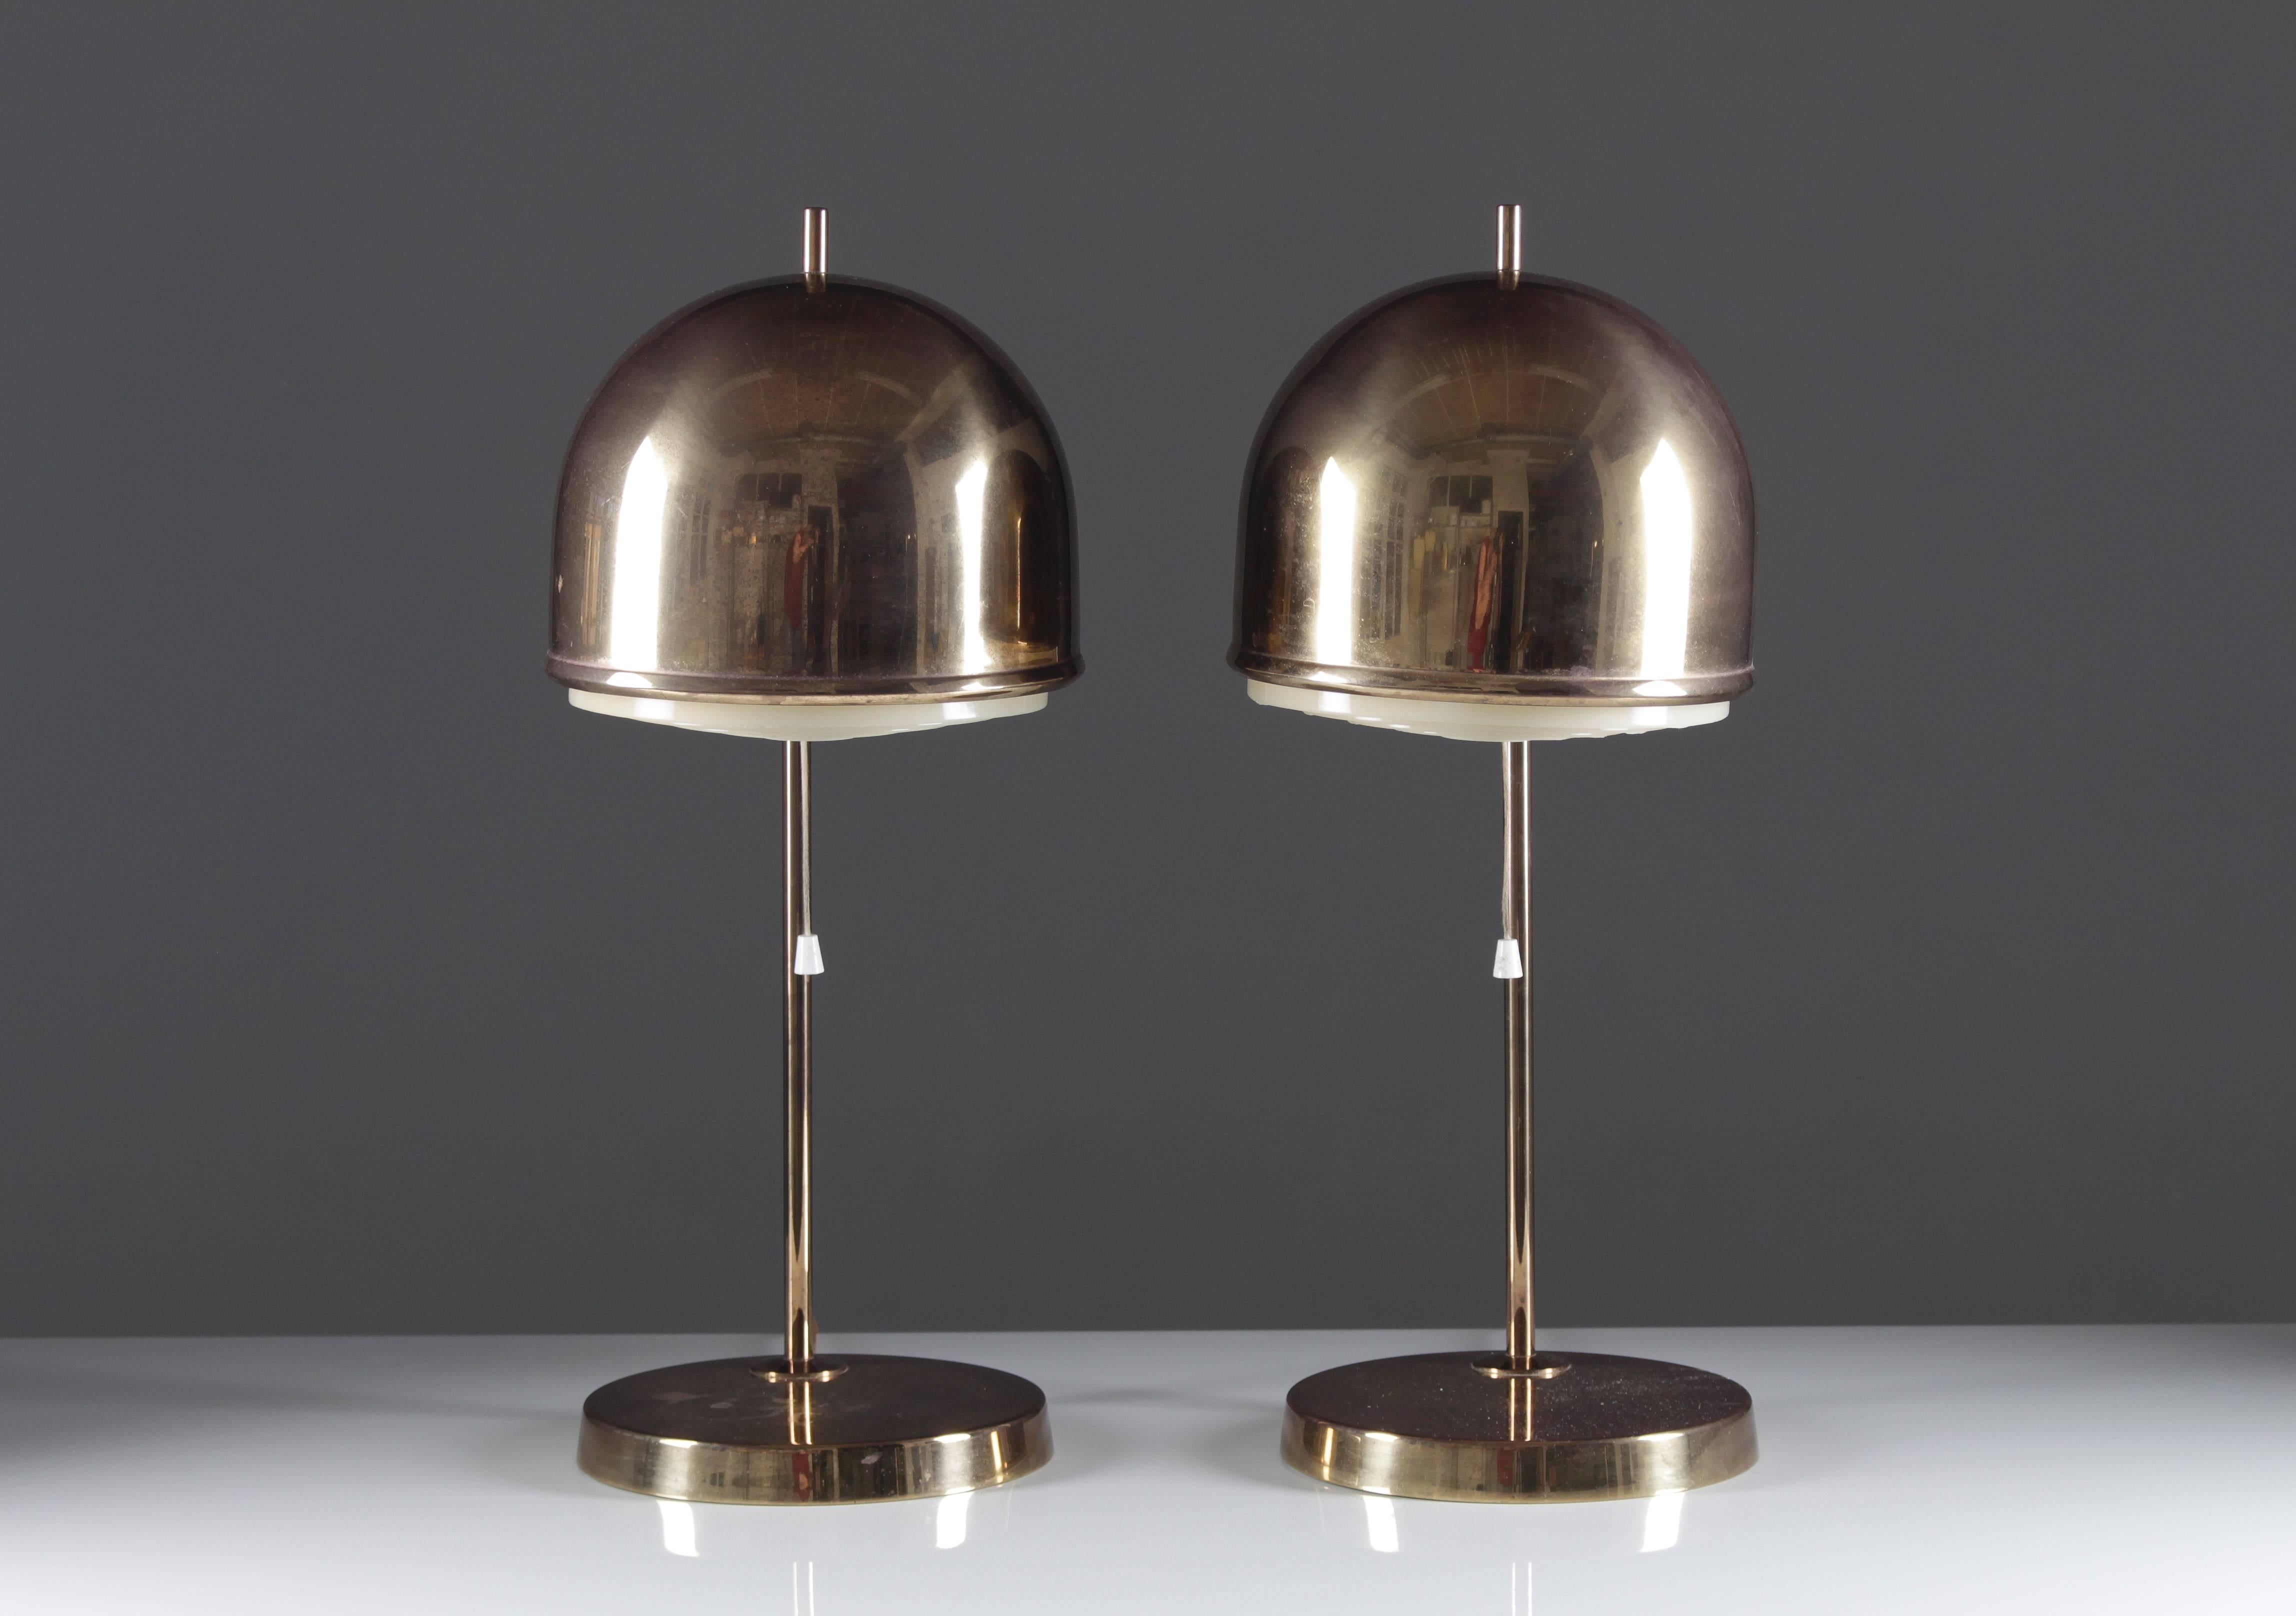 High-quality table lamps with diffusers and a perfect smooth patina on the brass. One small dent on one of the lamps as shown on picture.